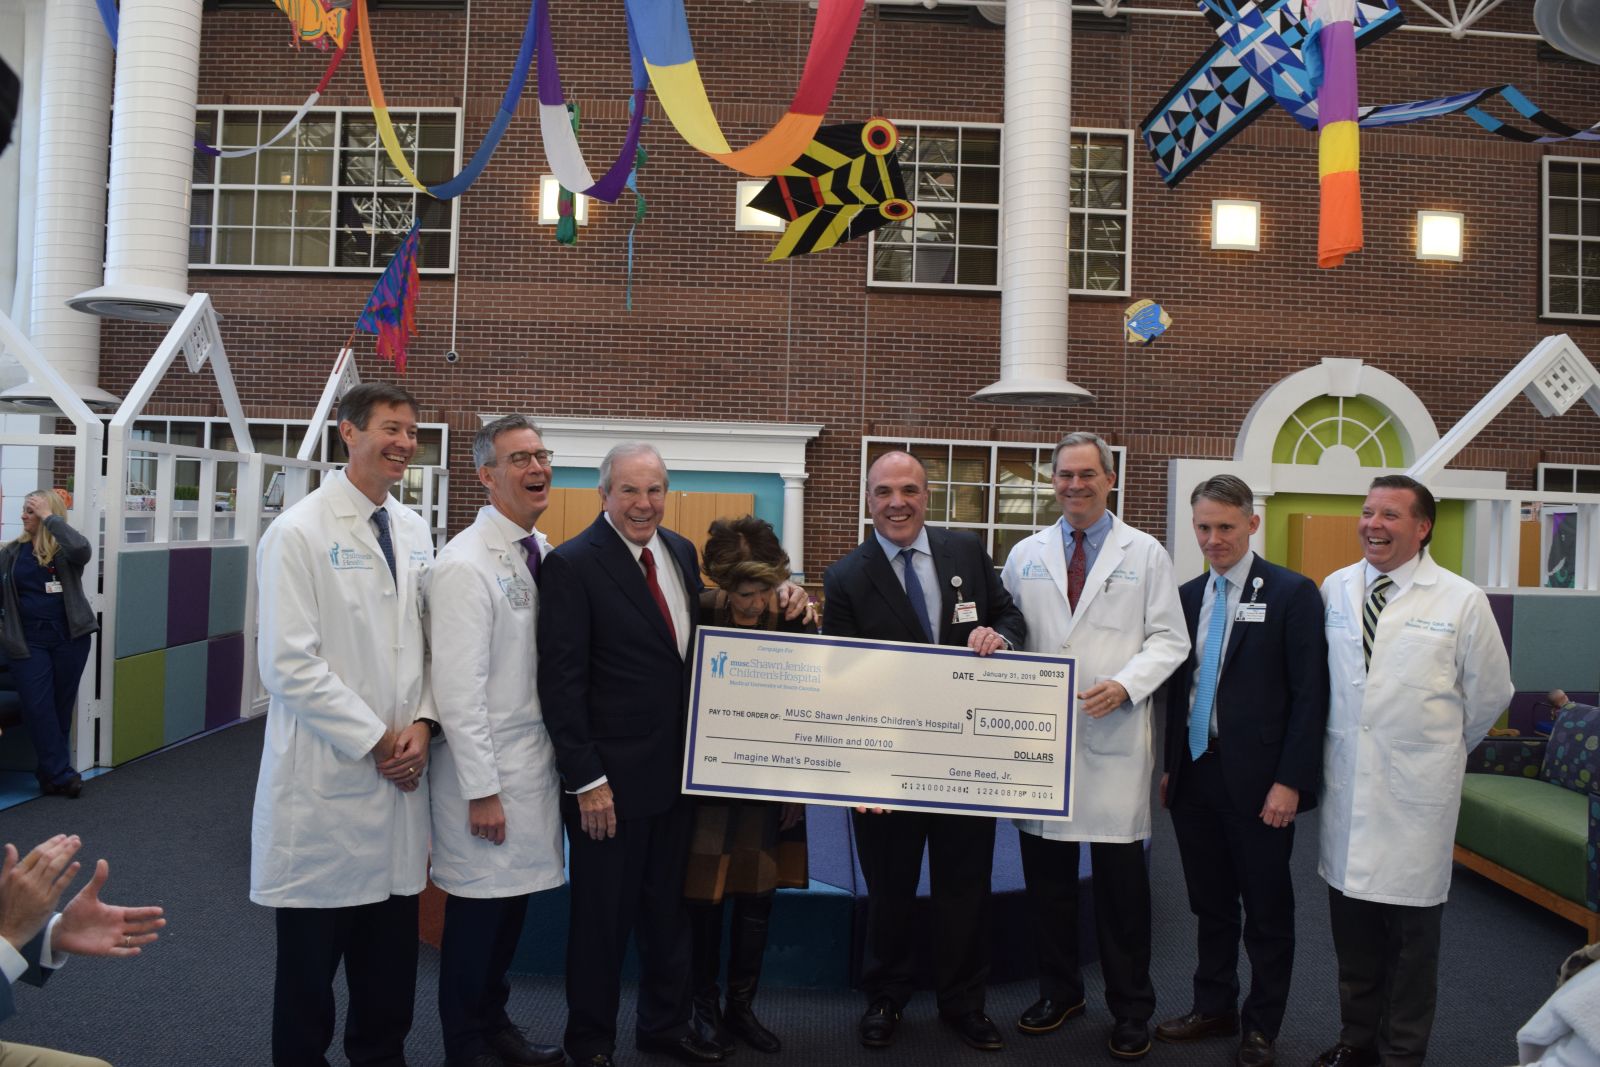 Gene Reed Jr. (third from left), former owner of several car dealerships, donated $5 million to support the pediatric heart program and inpatient floor at the new MUSC Shawn Jenkins Children??s hospital. (Photo/Patrick Hoff)